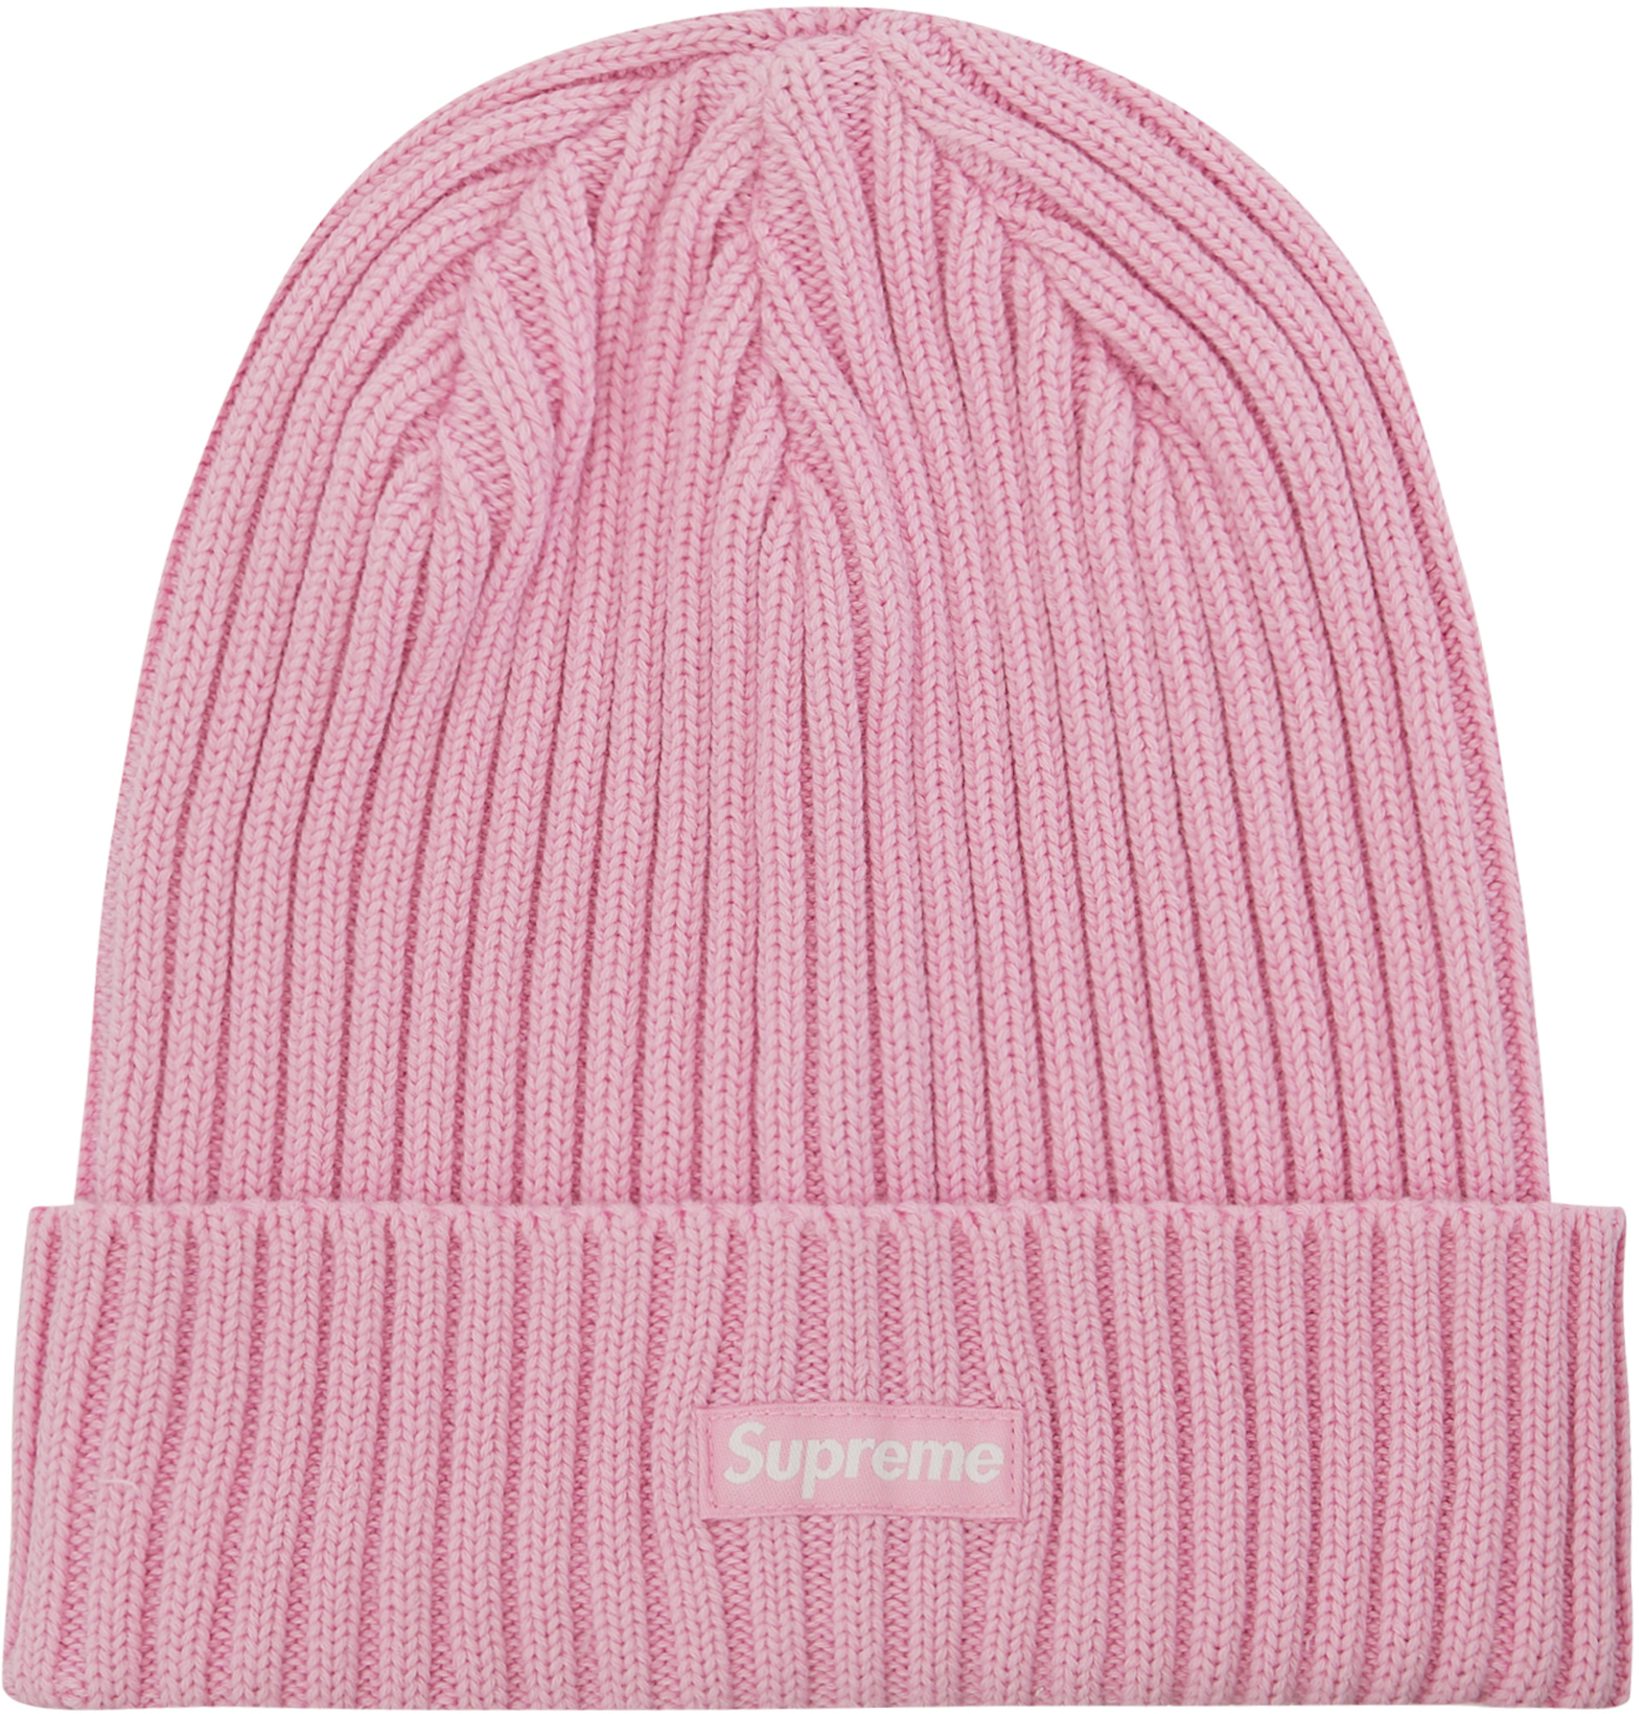 https://images.stockx.com/images/Supreme-Overdyed-Beanie-SS23-Pink.jpg?fit=fill&bg=FFFFFF&w=1200&h=857&fm=jpg&auto=compress&dpr=2&trim=color&updated_at=1676577765&q=60